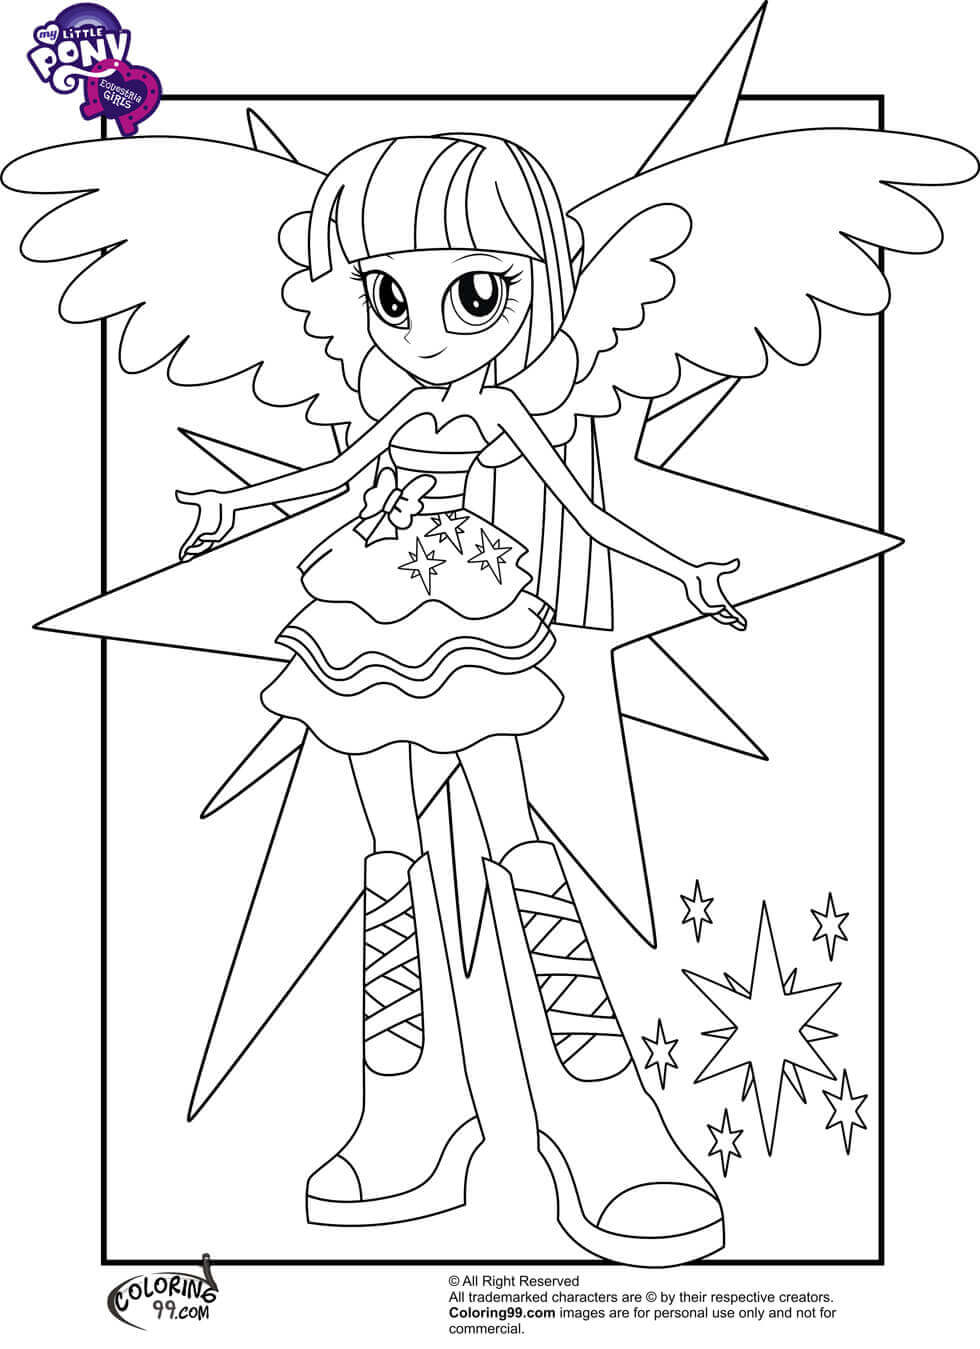 15 Printable My Little Pony Equestria Girls Coloring Pages